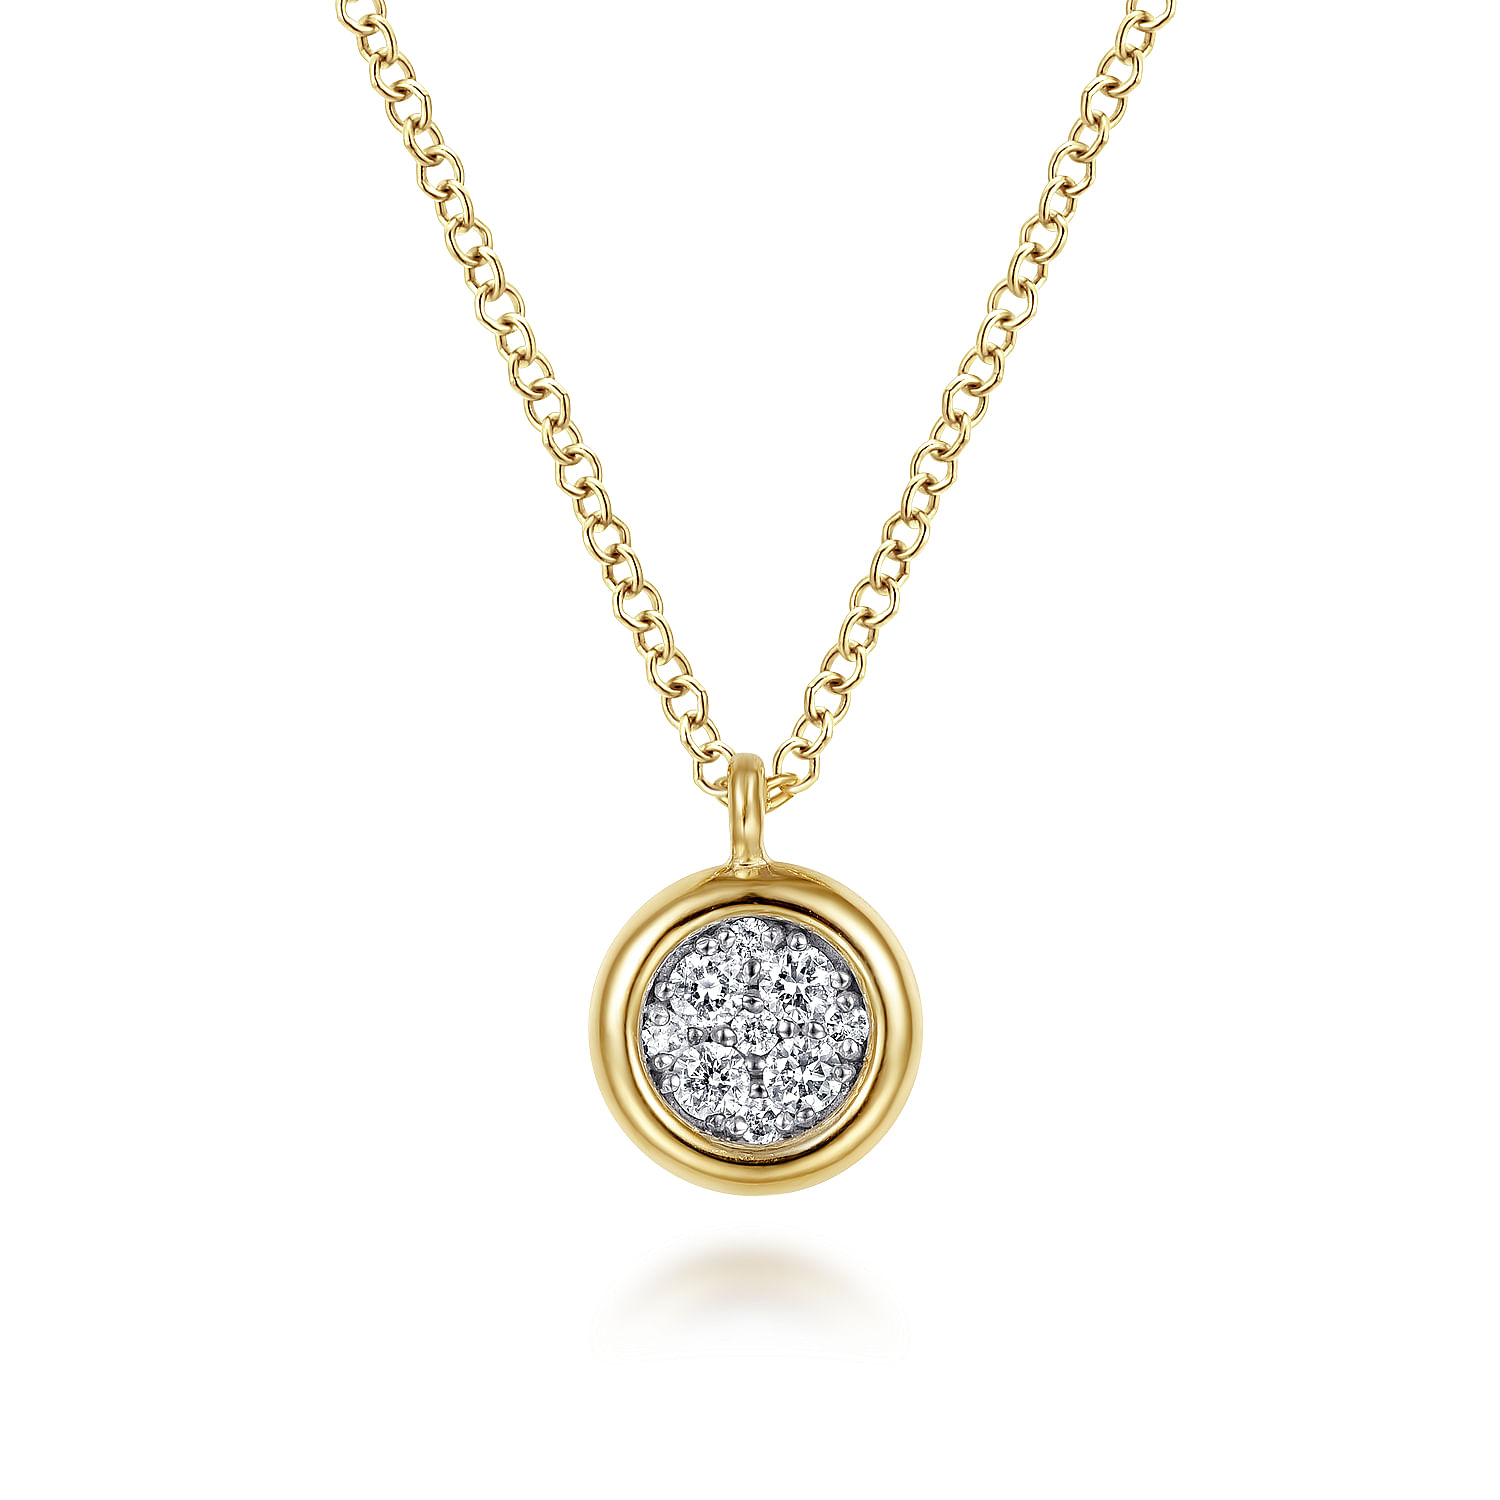 14K-Yellow-White-Gold-Round-Pave-Diamond-Cluster-Pendant-Necklace-with-Bezel-Frame1